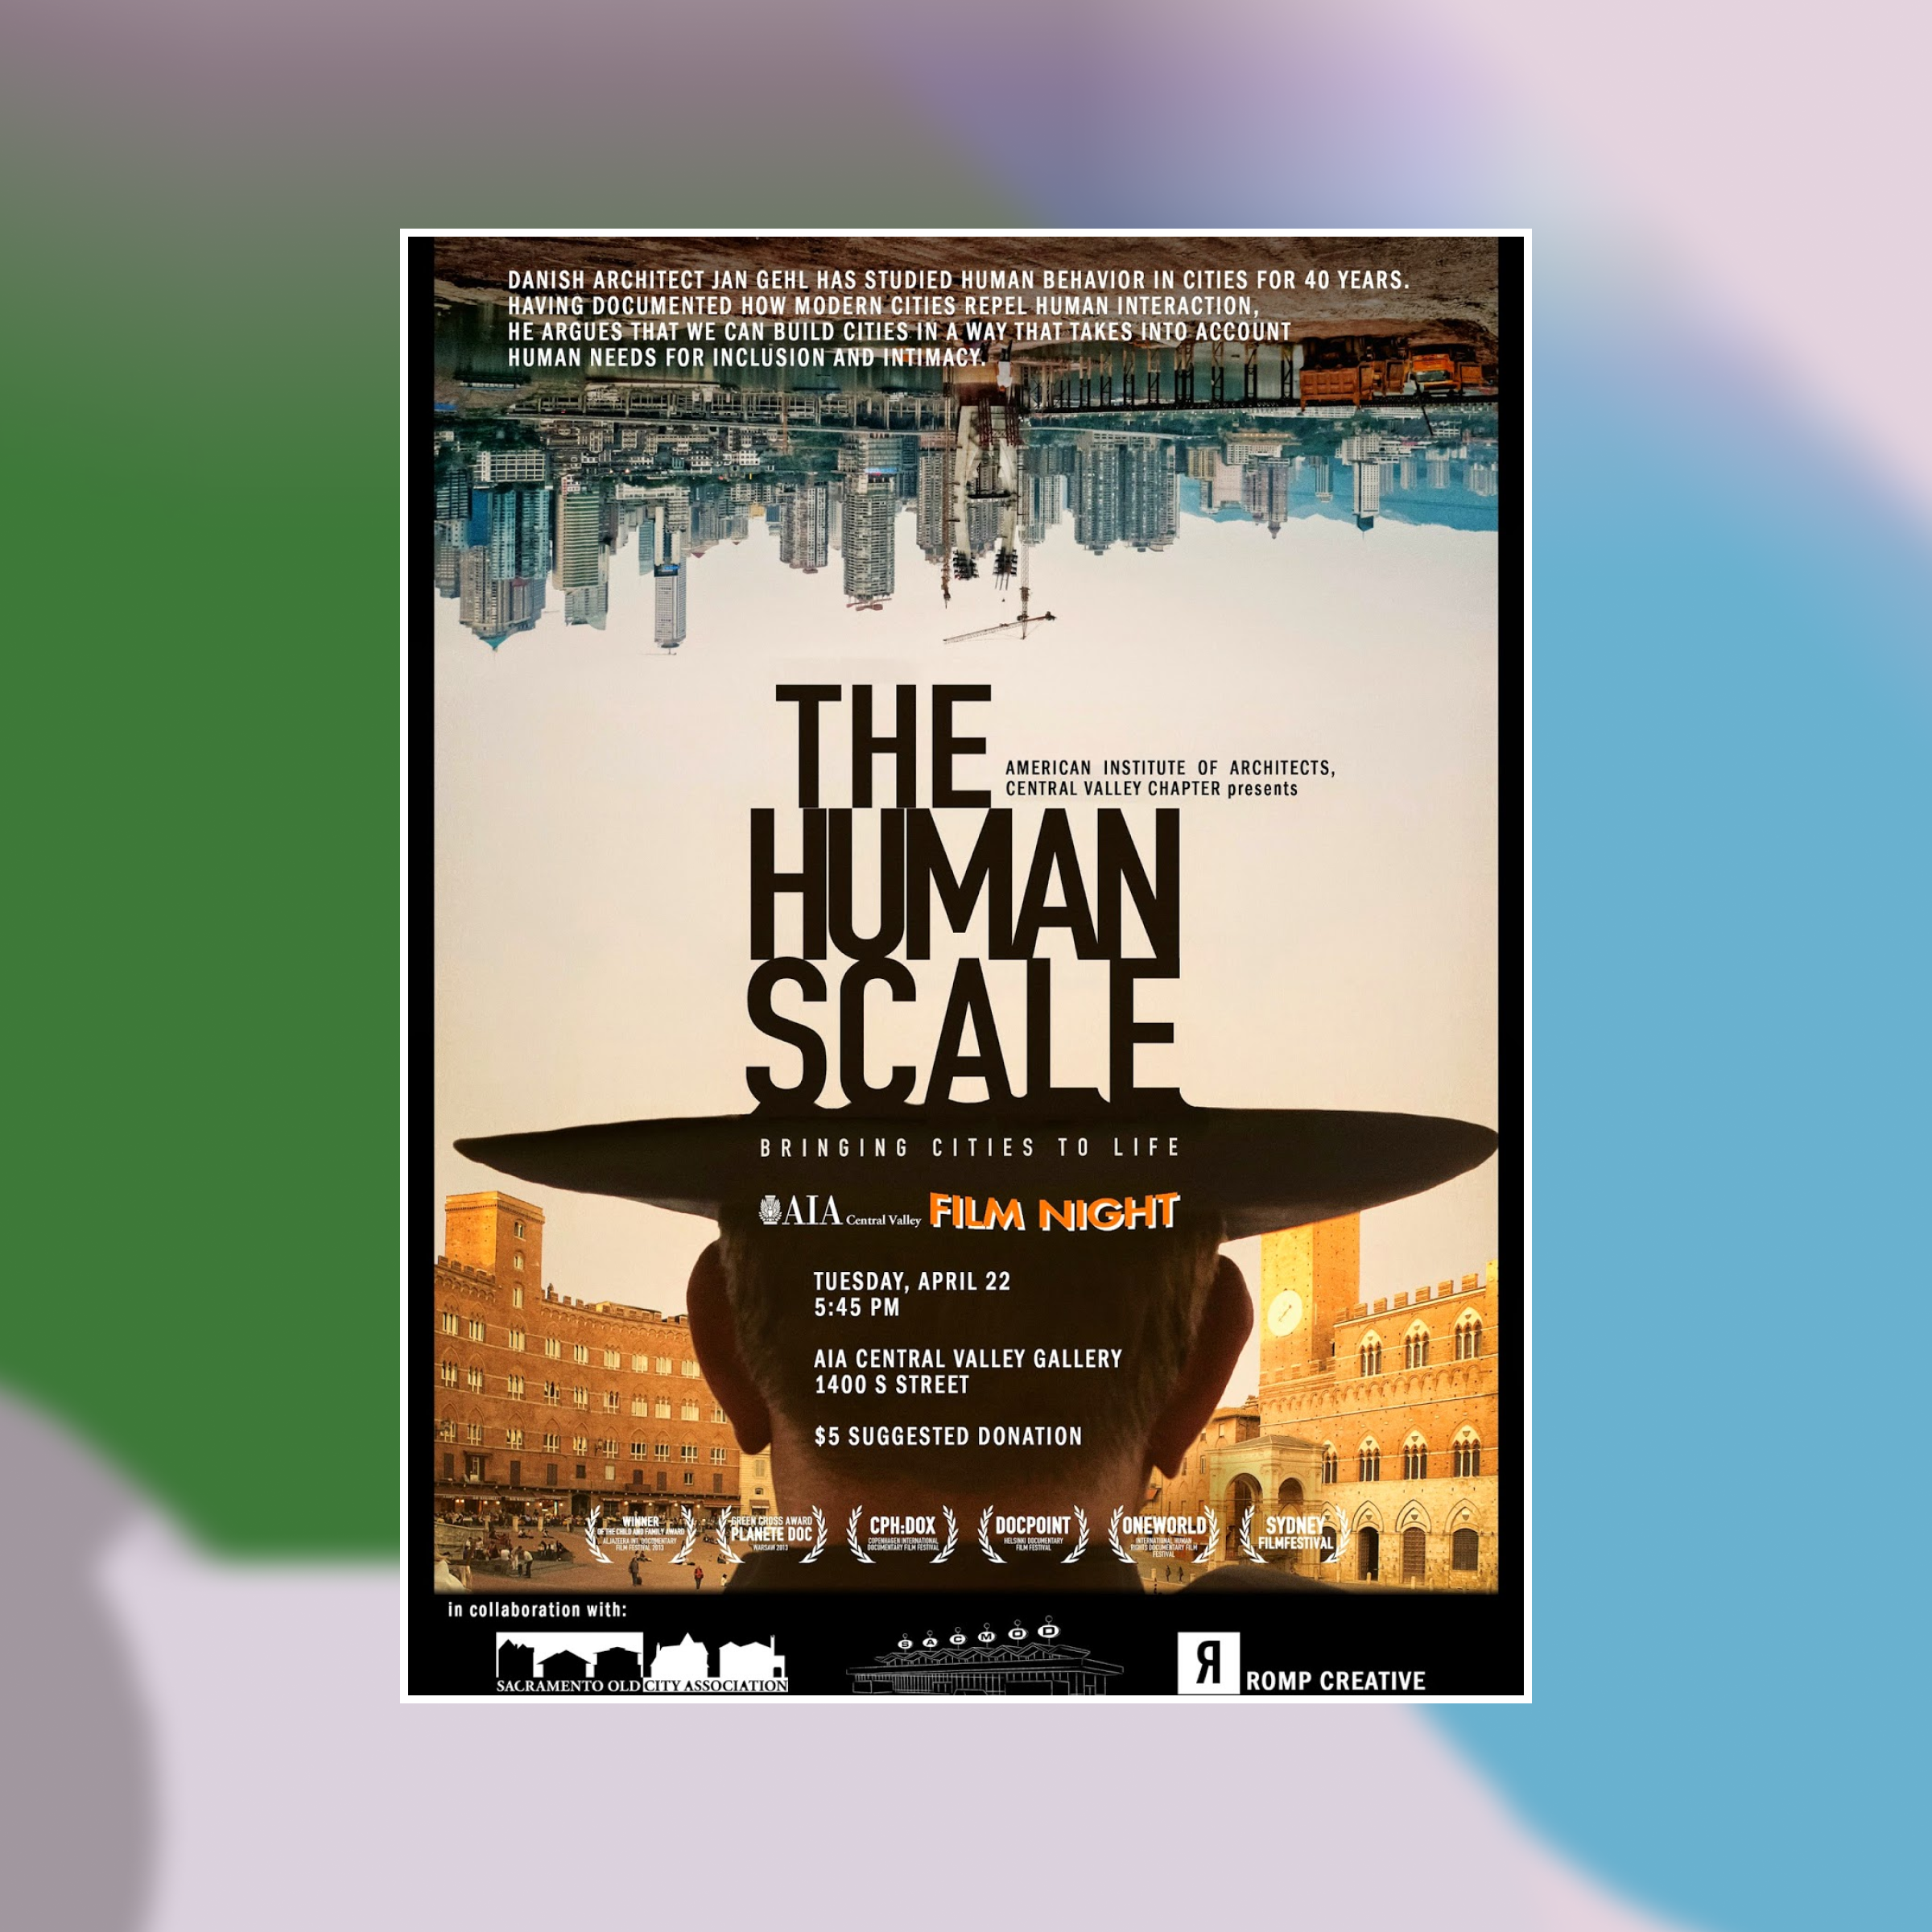 Movie cover of The Human Scale against a painted abstract background